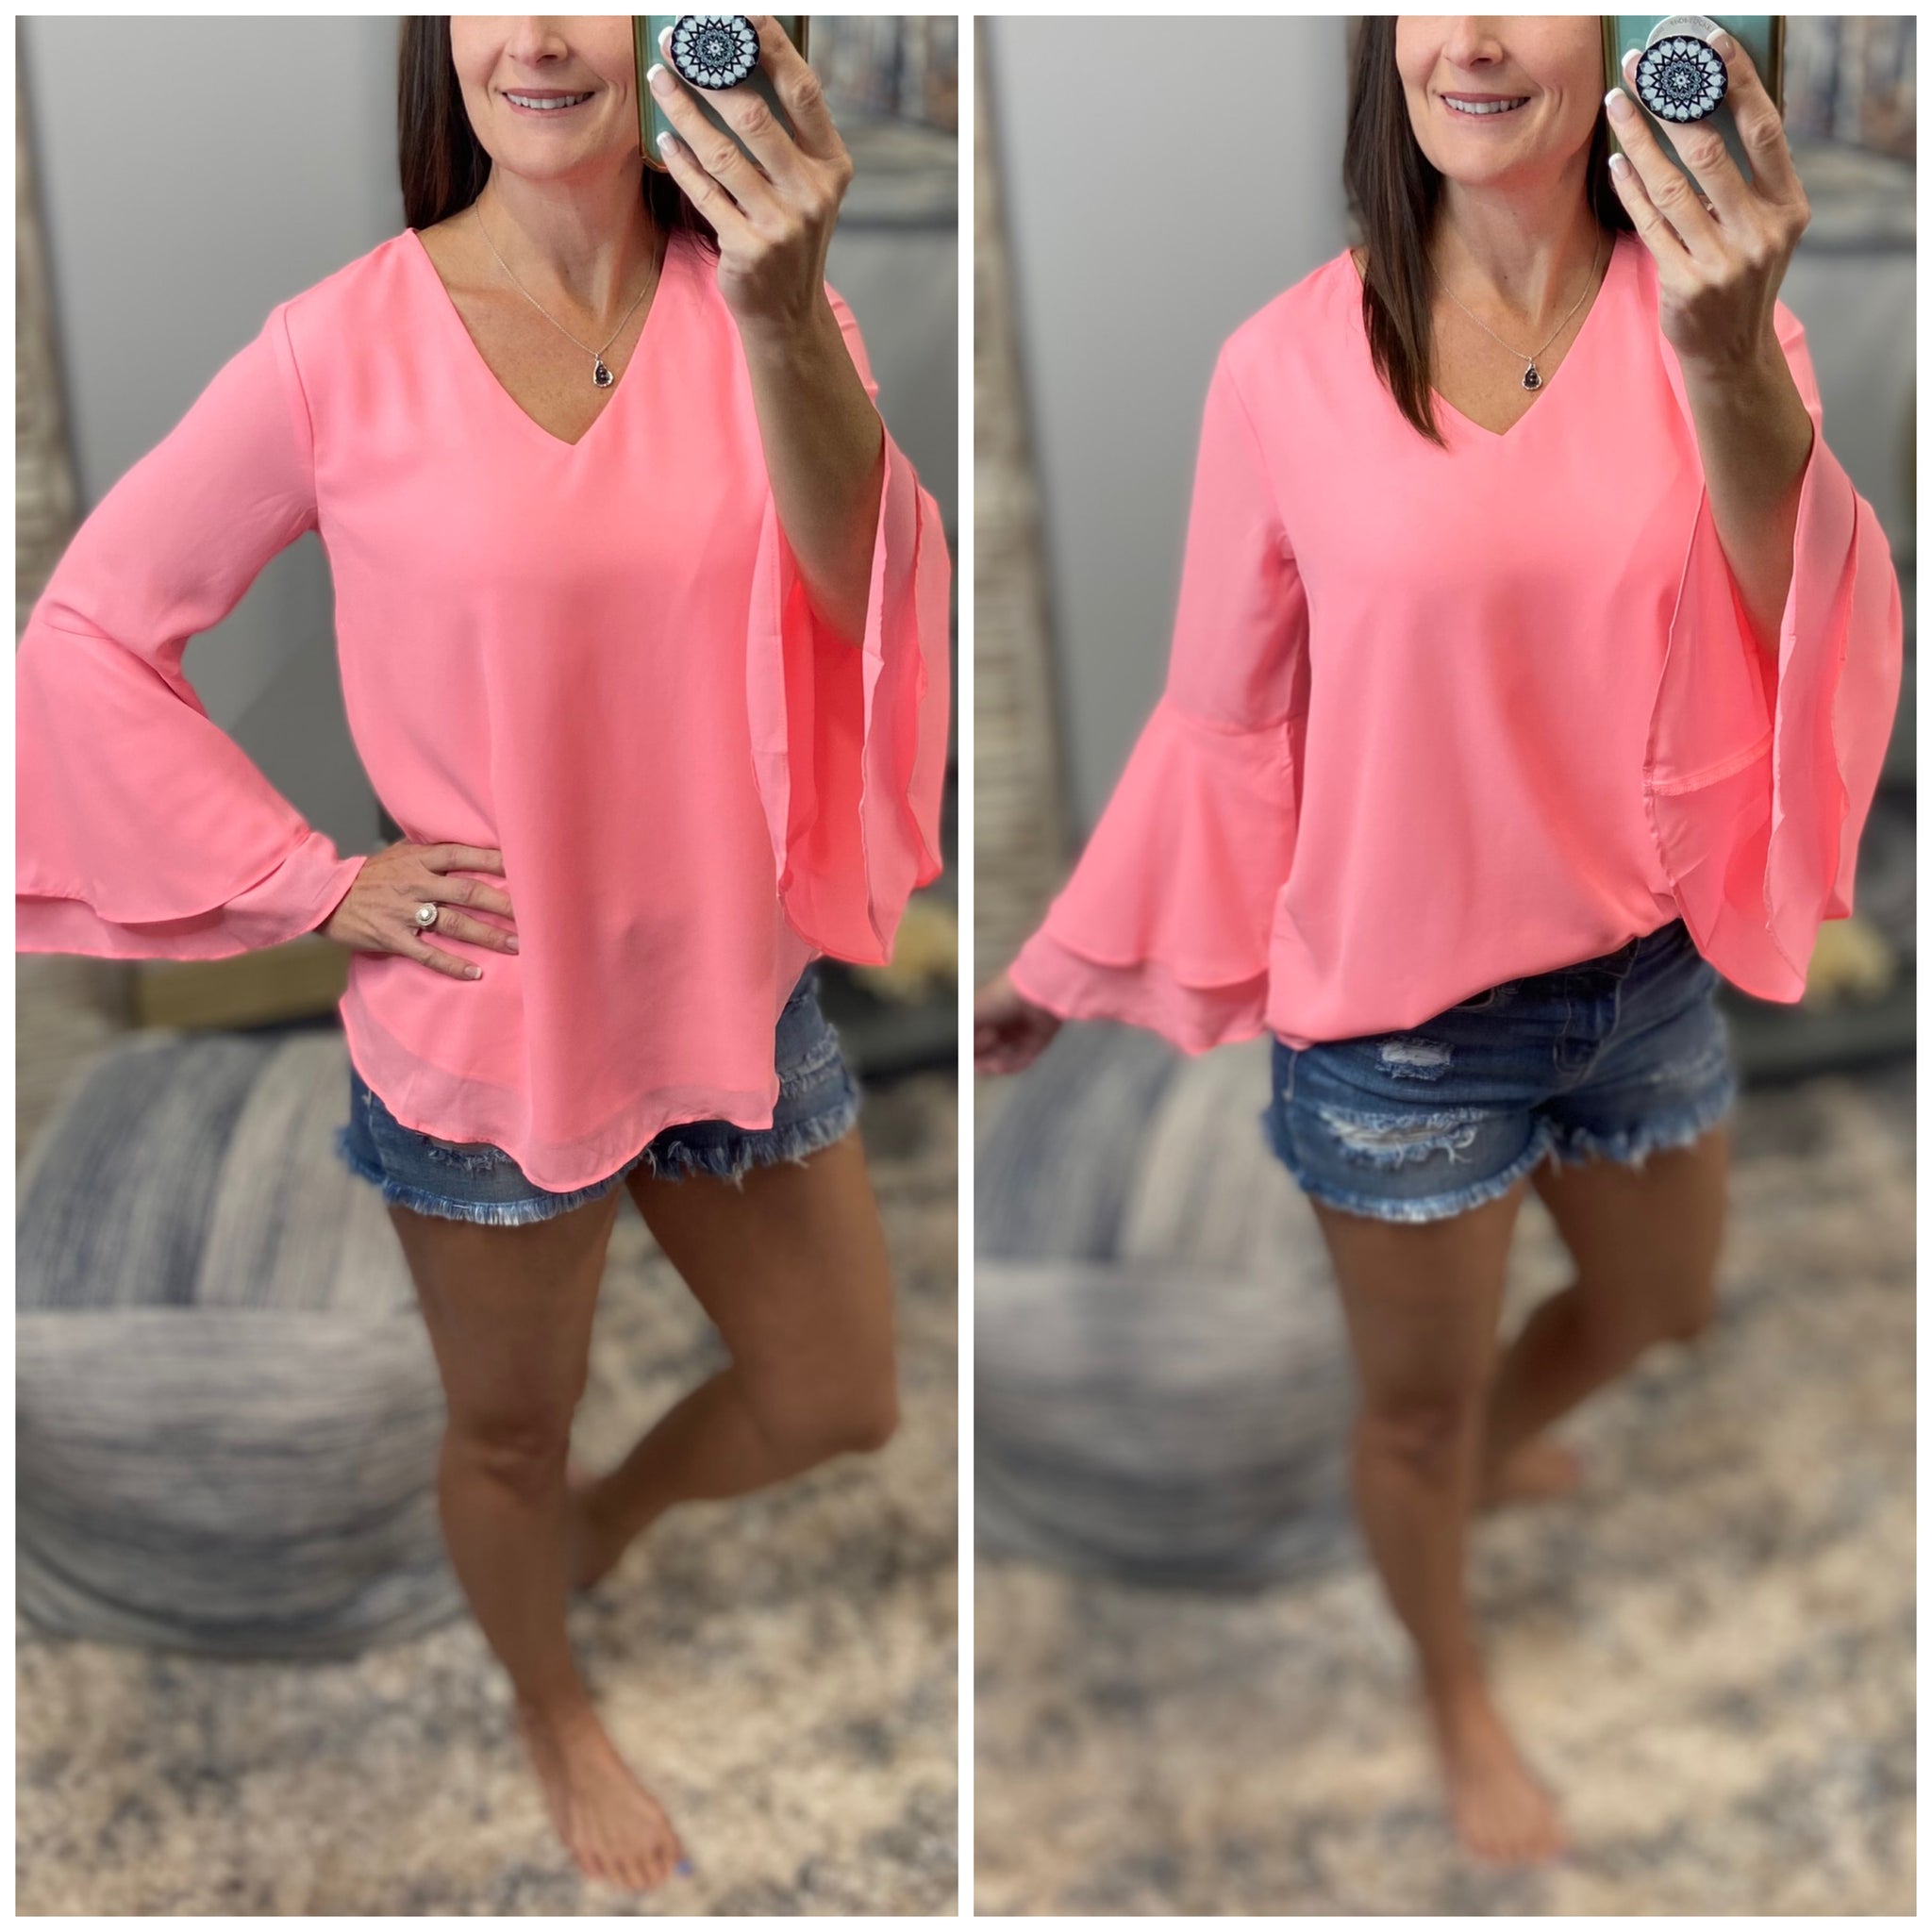 "Full of Surprises” V-Neck Flared Bell Layered Sleeve Dressy Top Neon Pink S/M/L/XL